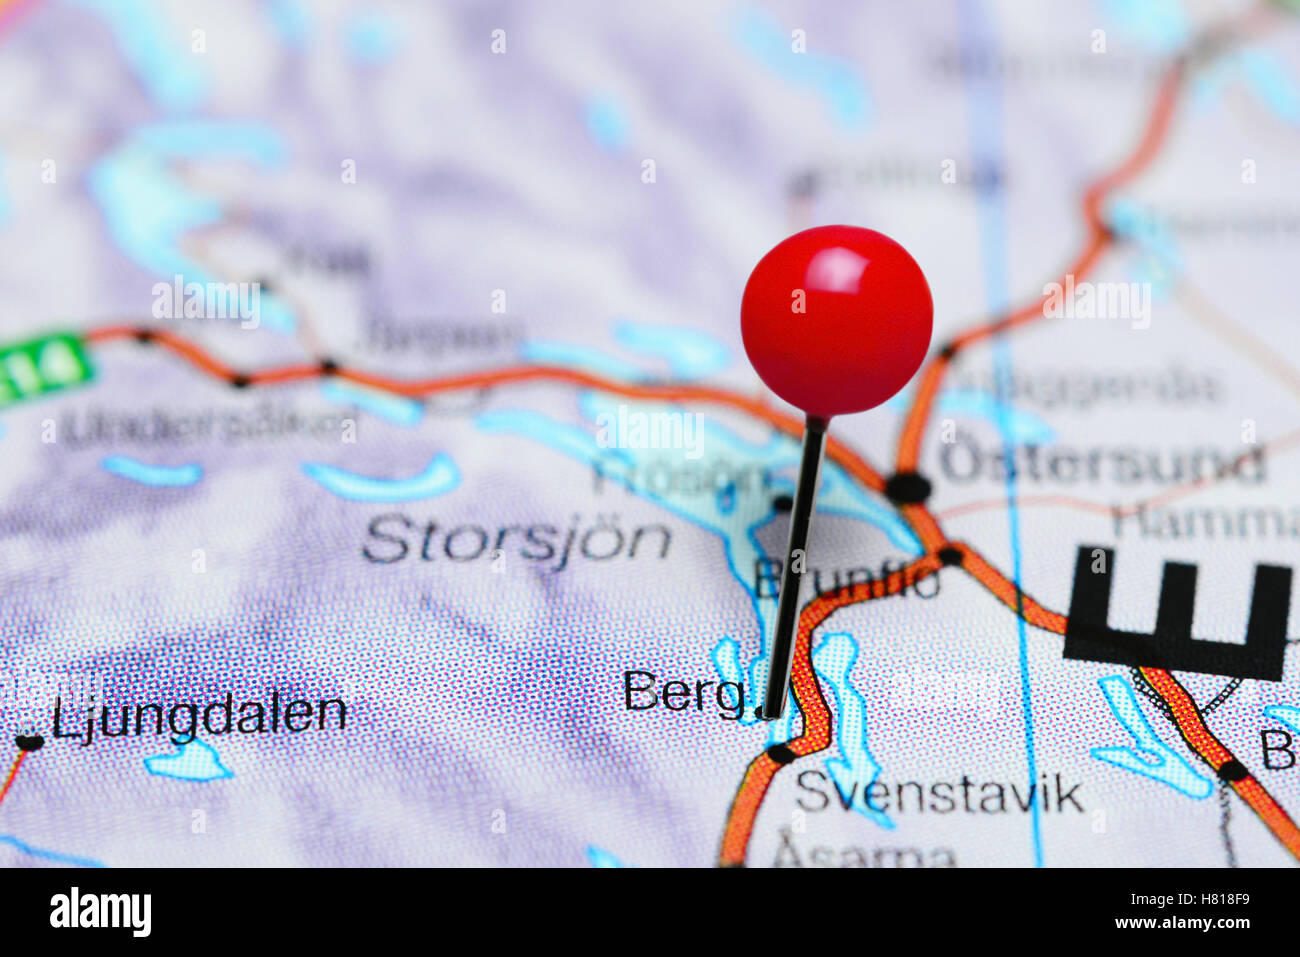 Berg pinned on a map of Sweden Stock Photo